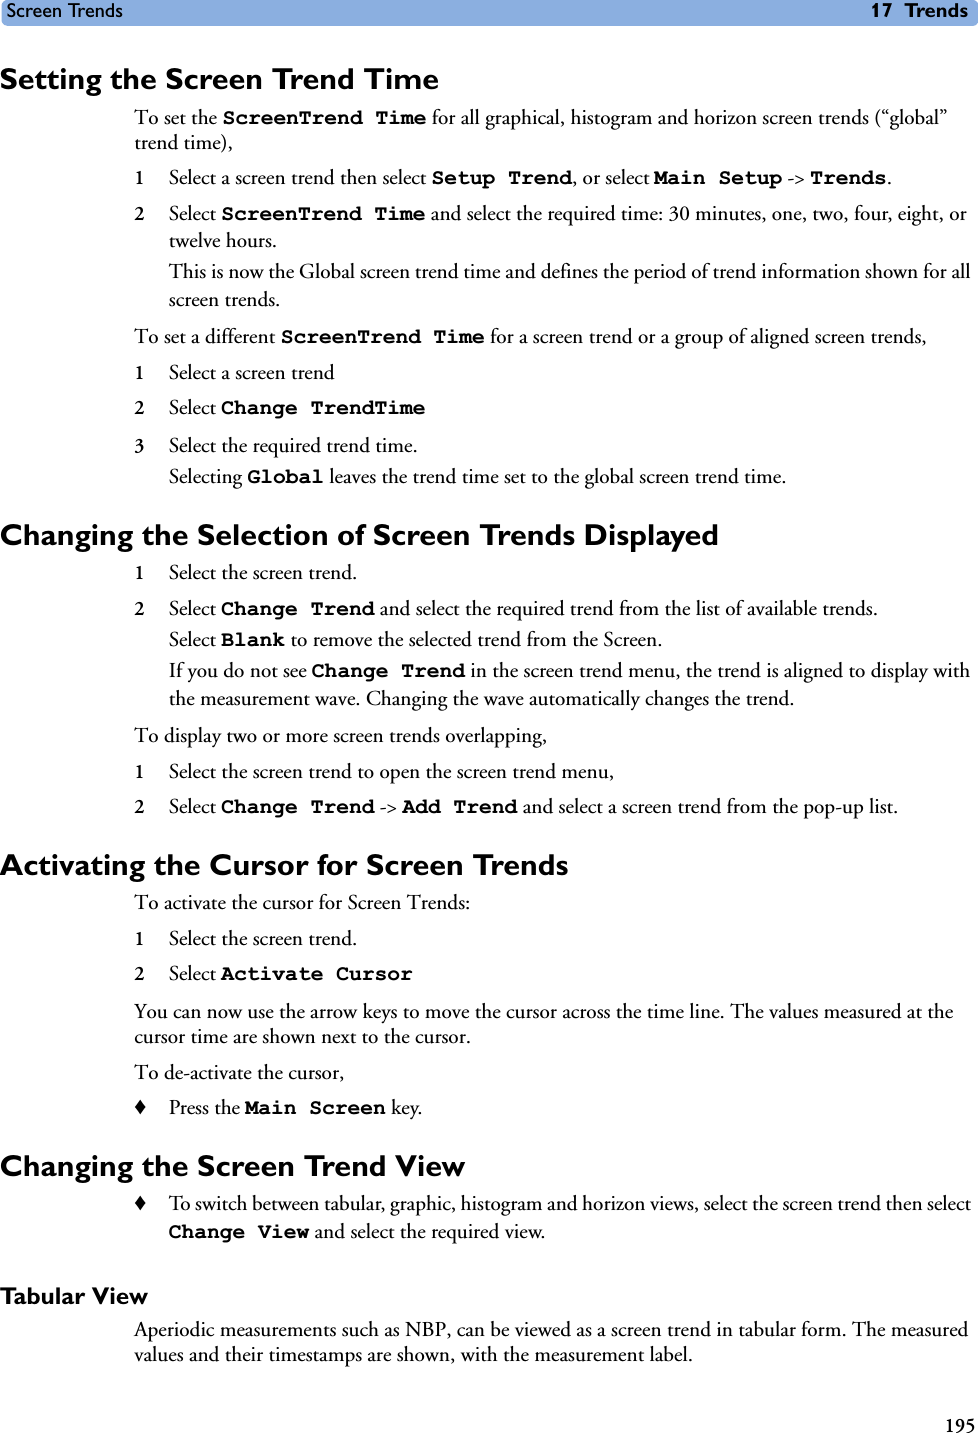 Screen Trends 17 Trends195Setting the Screen Trend TimeTo set the ScreenTrend Time for all graphical, histogram and horizon screen trends (“global” trend time), 1Select a screen trend then select Setup Trend, or select Main Setup -&gt; Trends.2Select ScreenTrend Time and select the required time: 30 minutes, one, two, four, eight, or twelve hours.This is now the Global screen trend time and defines the period of trend information shown for all screen trends. To set a different ScreenTrend Time for a screen trend or a group of aligned screen trends,1Select a screen trend2Select Change TrendTime3Select the required trend time.Selecting Global leaves the trend time set to the global screen trend time. Changing the Selection of Screen Trends Displayed1Select the screen trend.2Select Change Trend and select the required trend from the list of available trends.Select Blank to remove the selected trend from the Screen. If you do not see Change Trend in the screen trend menu, the trend is aligned to display with the measurement wave. Changing the wave automatically changes the trend. To display two or more screen trends overlapping, 1Select the screen trend to open the screen trend menu, 2Select Change Trend -&gt; Add Trend and select a screen trend from the pop-up list. Activating the Cursor for Screen TrendsTo activate the cursor for Screen Trends:1Select the screen trend.2Select Activate CursorYou can now use the arrow keys to move the cursor across the time line. The values measured at the cursor time are shown next to the cursor. To de-activate the cursor,♦Press the Main Screen key.Changing the Screen Trend View ♦To switch between tabular, graphic, histogram and horizon views, select the screen trend then select Change View and select the required view. Tabular ViewAperiodic measurements such as NBP, can be viewed as a screen trend in tabular form. The measured values and their timestamps are shown, with the measurement label.